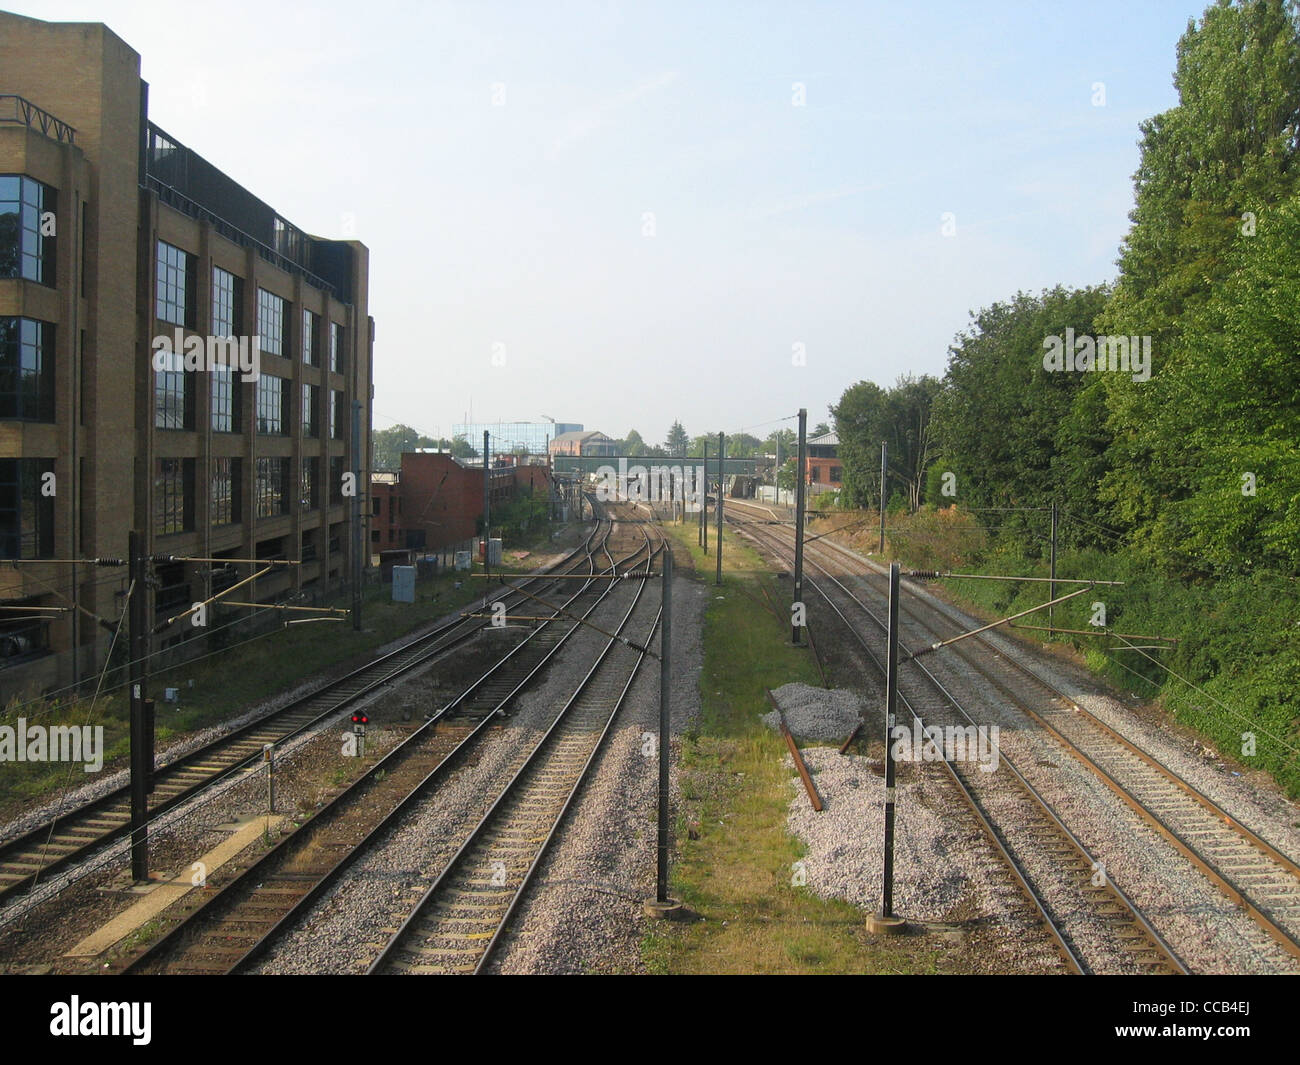 Midland Main Line at St Albans, looking south towards the St Albans City Station. Stock Photo